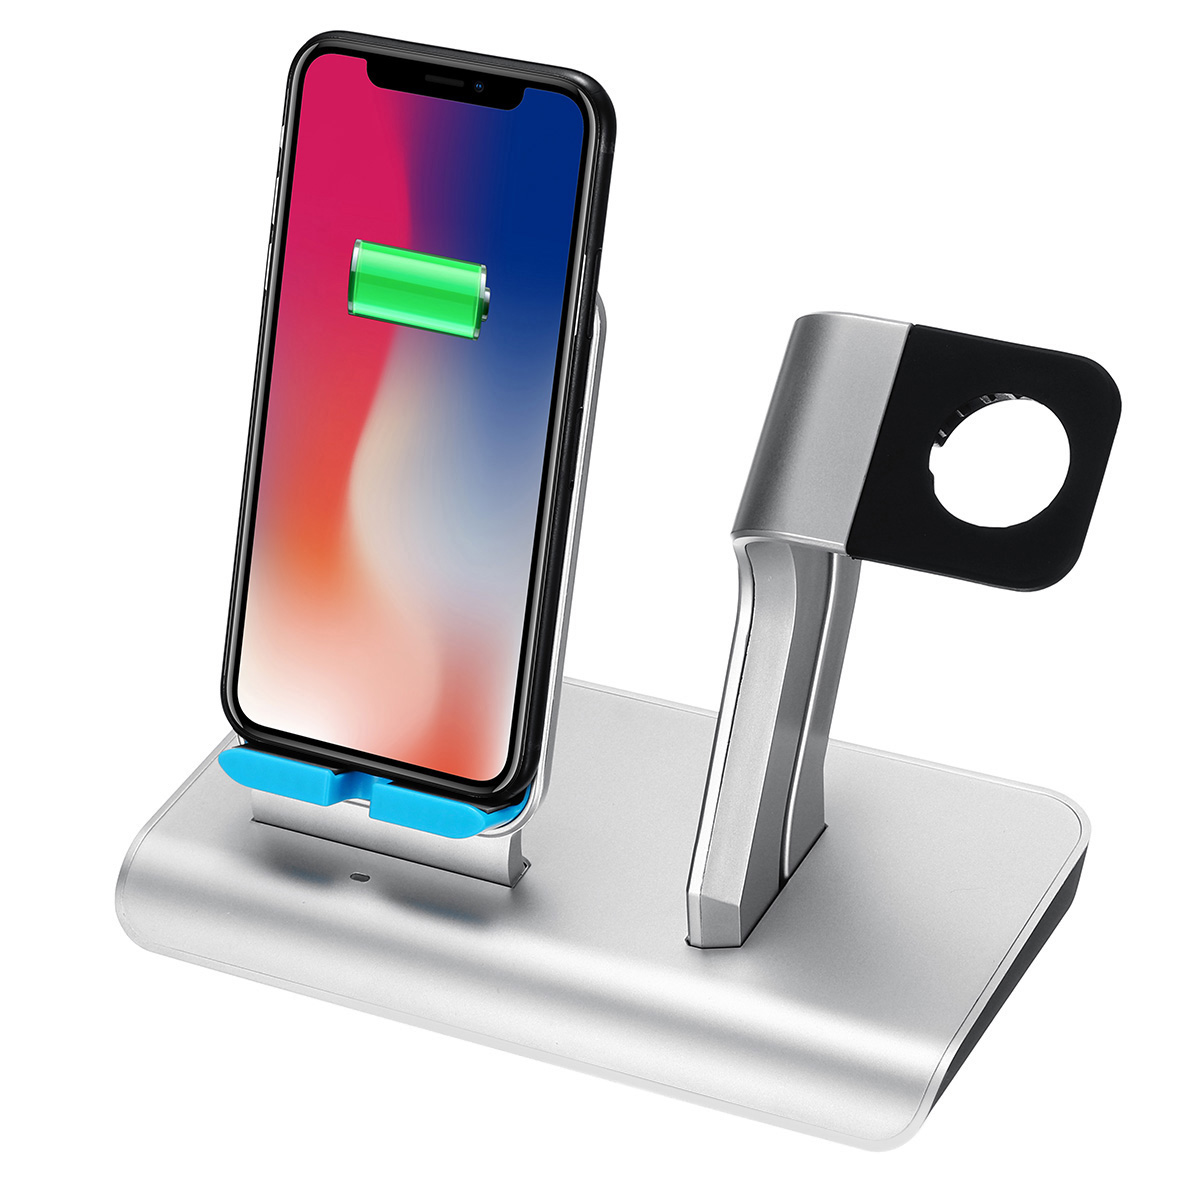 10W-2-In-1-Qi-Wireless-Charger-Fast-Charging-Phone-Watch-Holder-For-iPhone-Samsung-Huawei-Apple-Watc-1416645-7